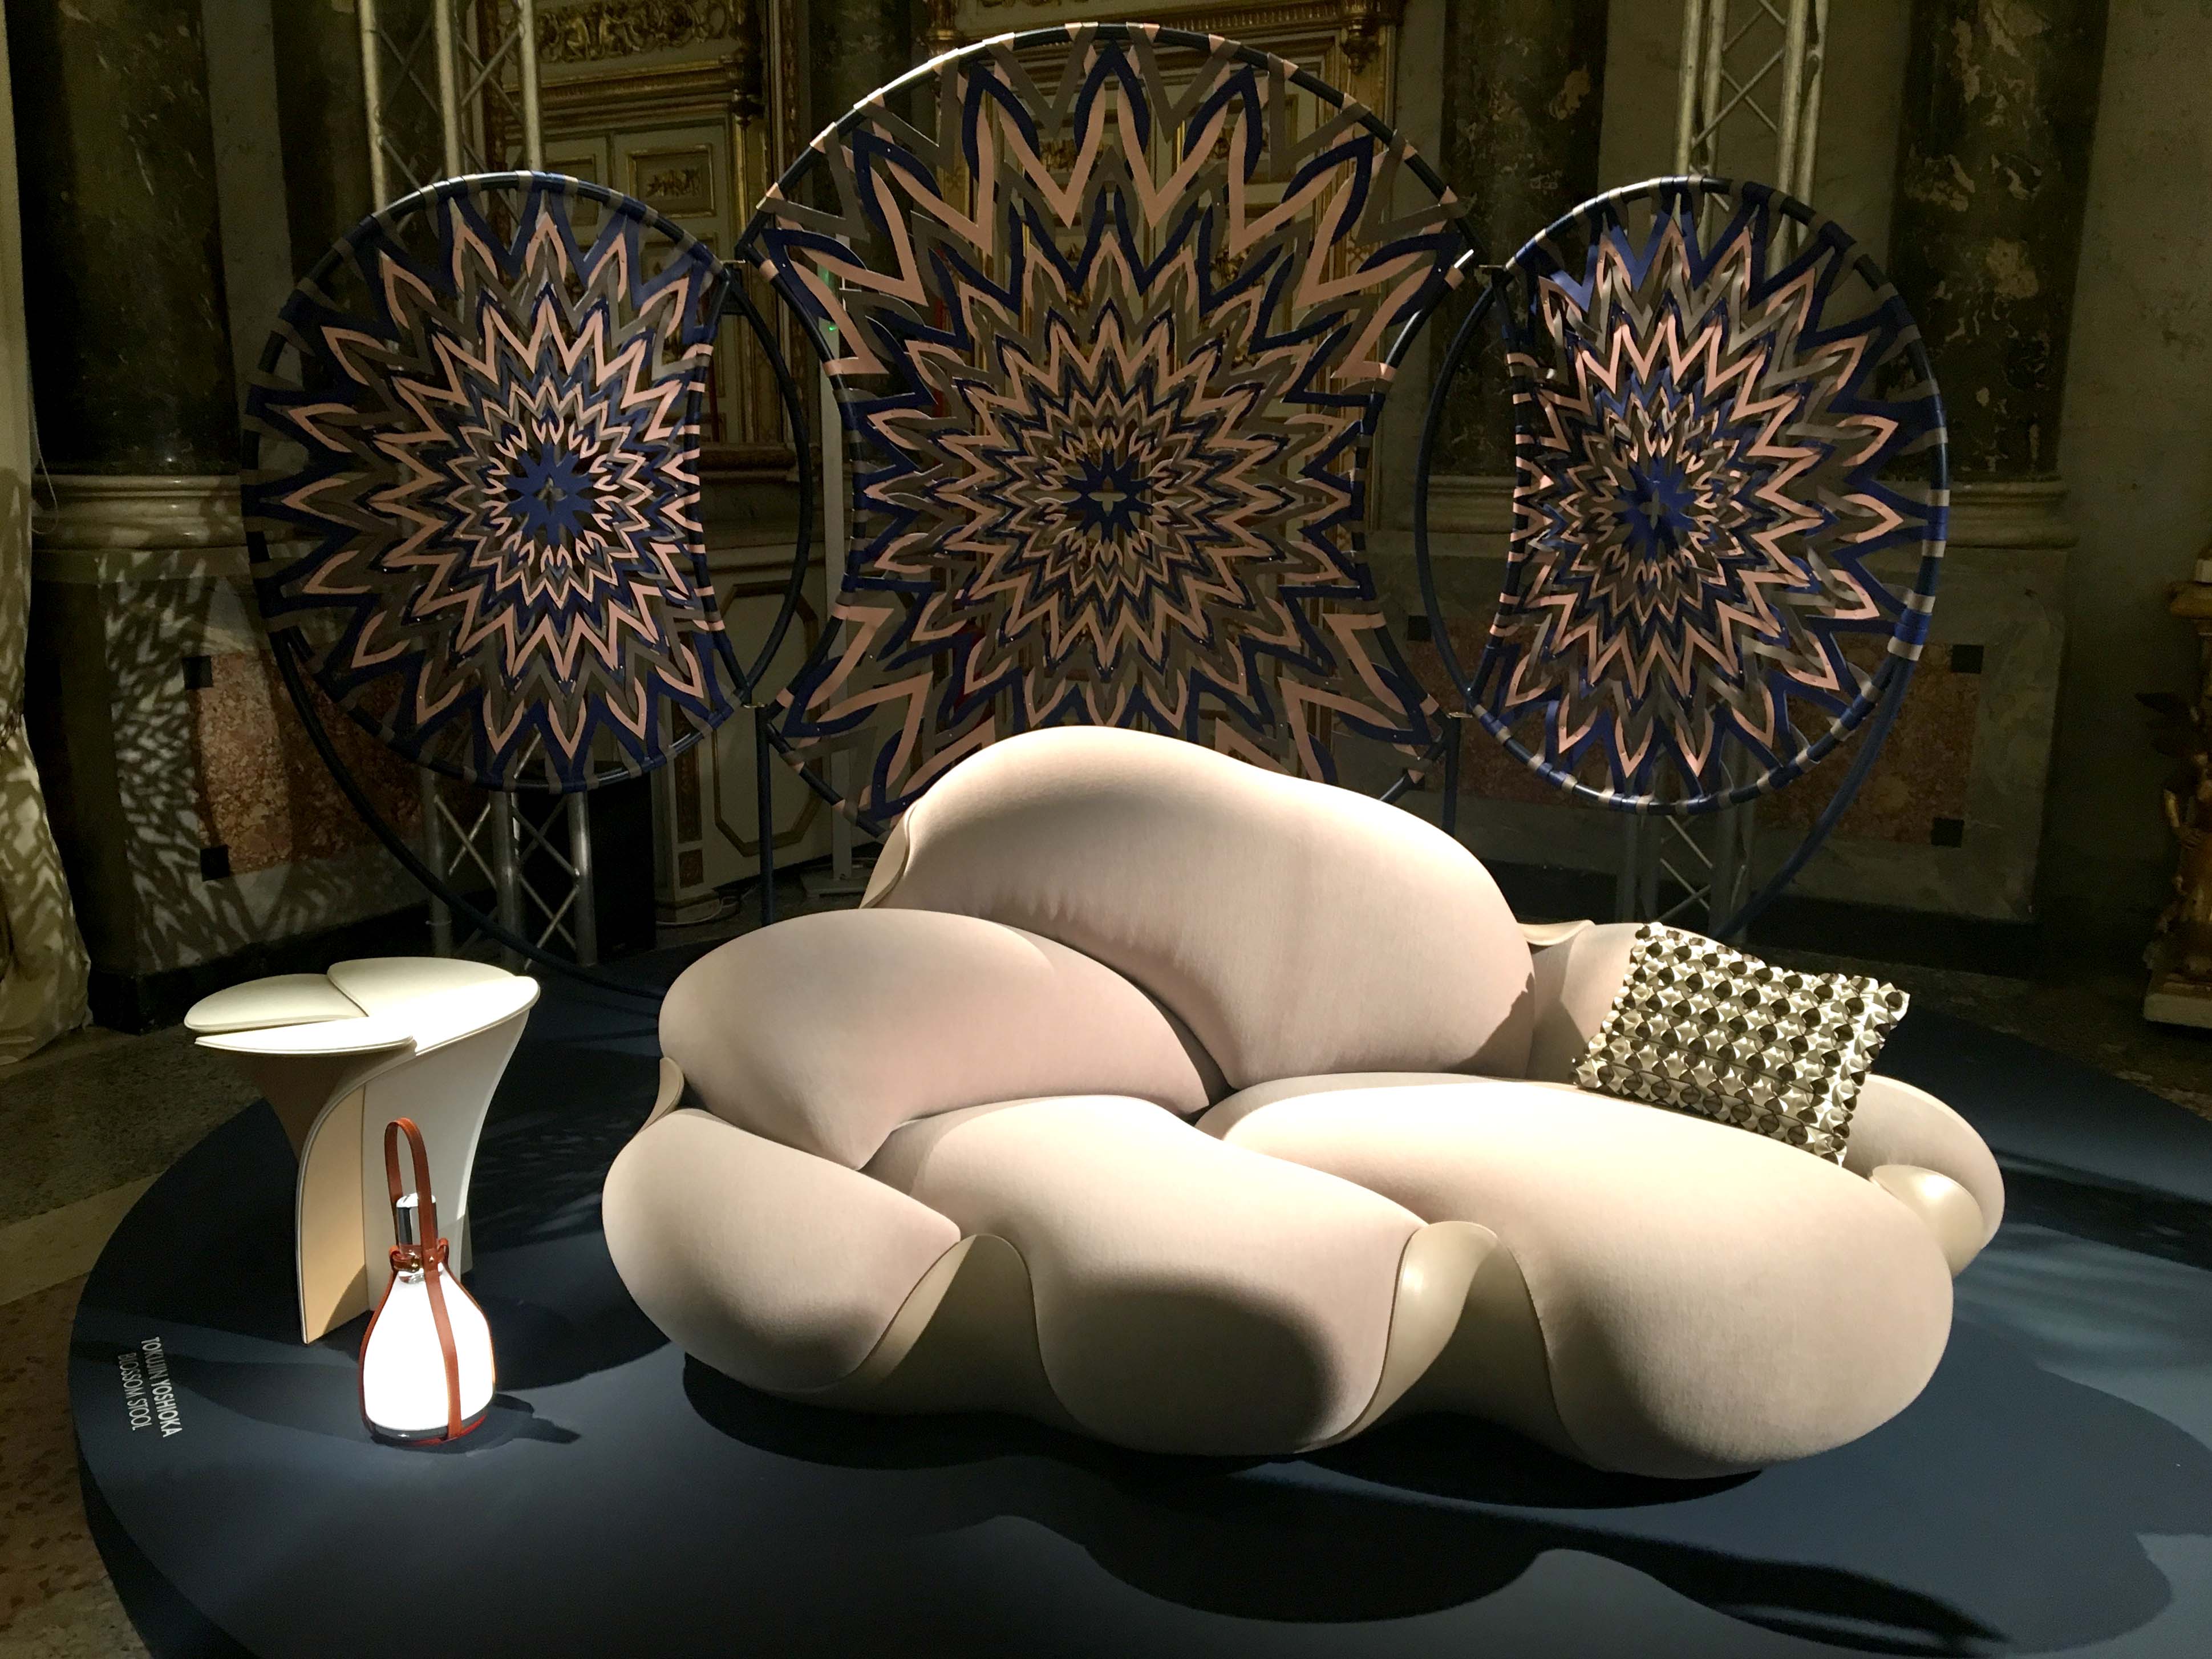 Live from Salone del Mobile: The Louis Vuitton Objets Nomades